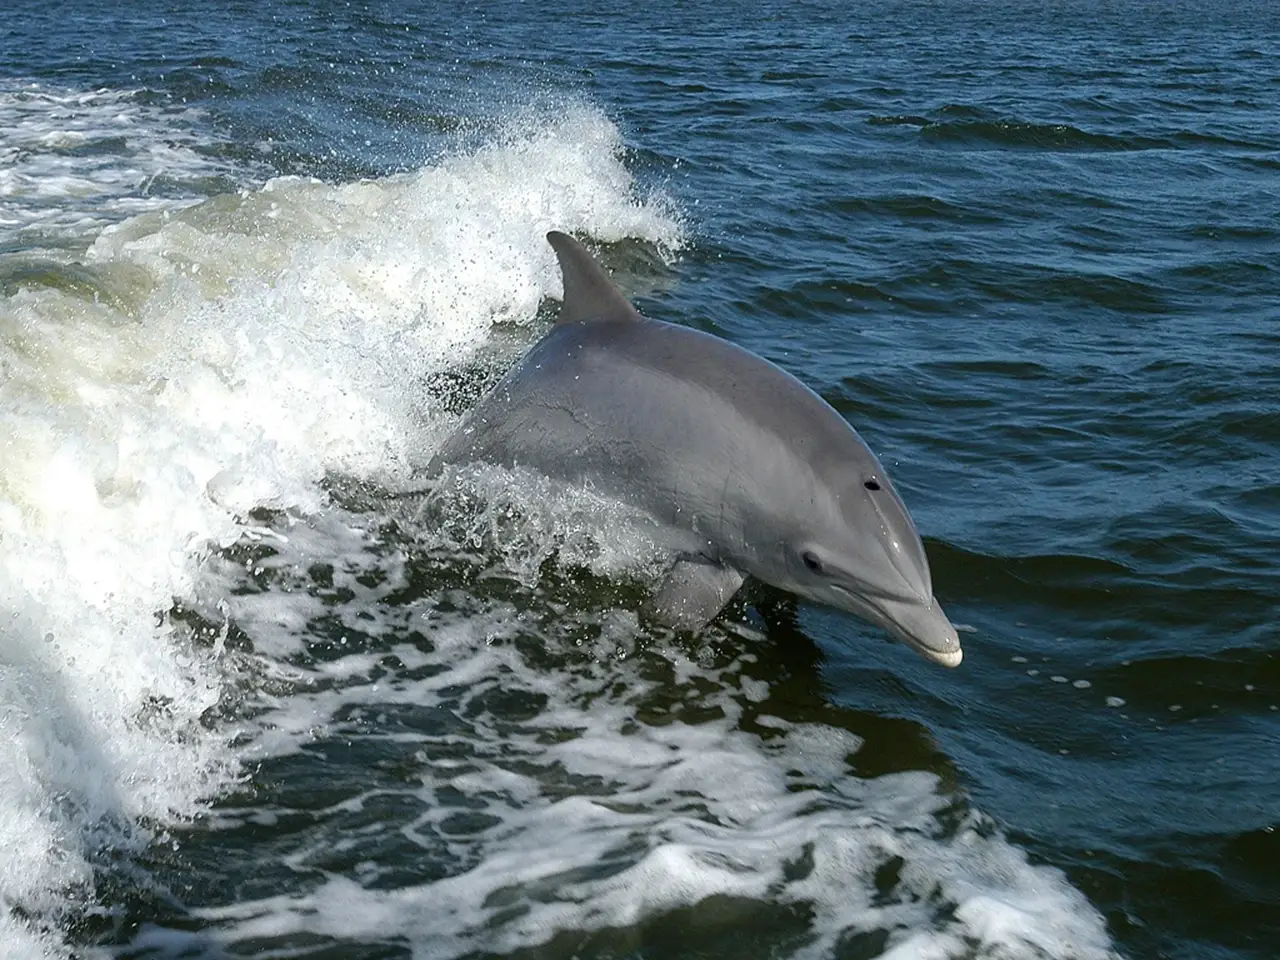 “National Dolphin Day” is a day to raise awareness for dolphin conservation.